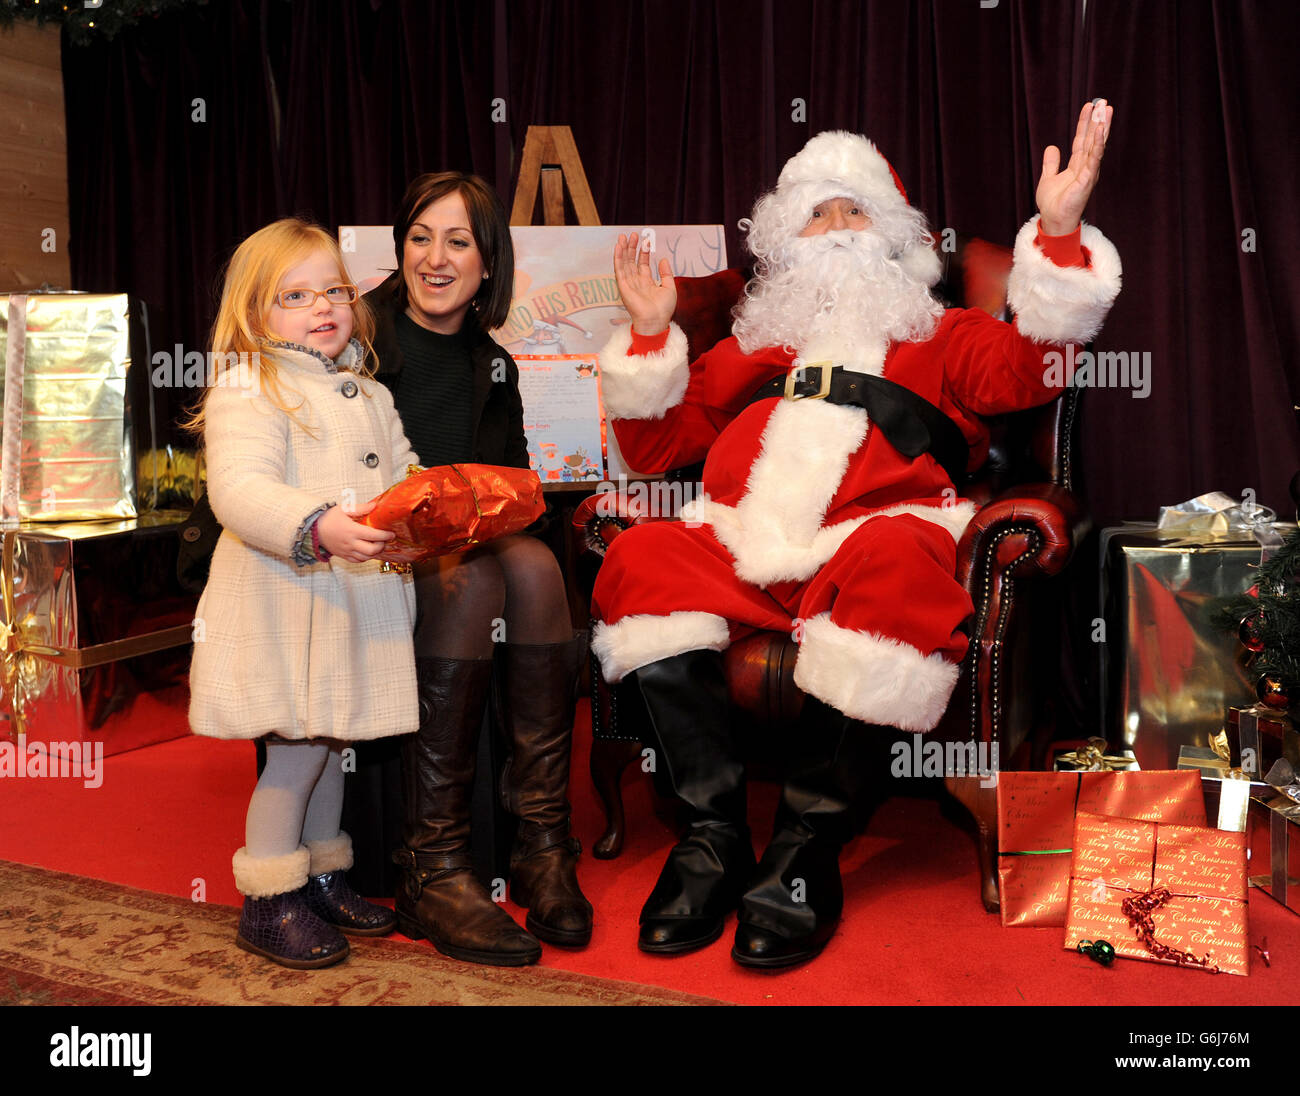 Natalie Cassidy with her daughter Eliza, help launch the Meet Santa experience at ZSL London Zoo and help to get the festive season started at the zoo by being the first to meet Santa and his reindeer. Stock Photo